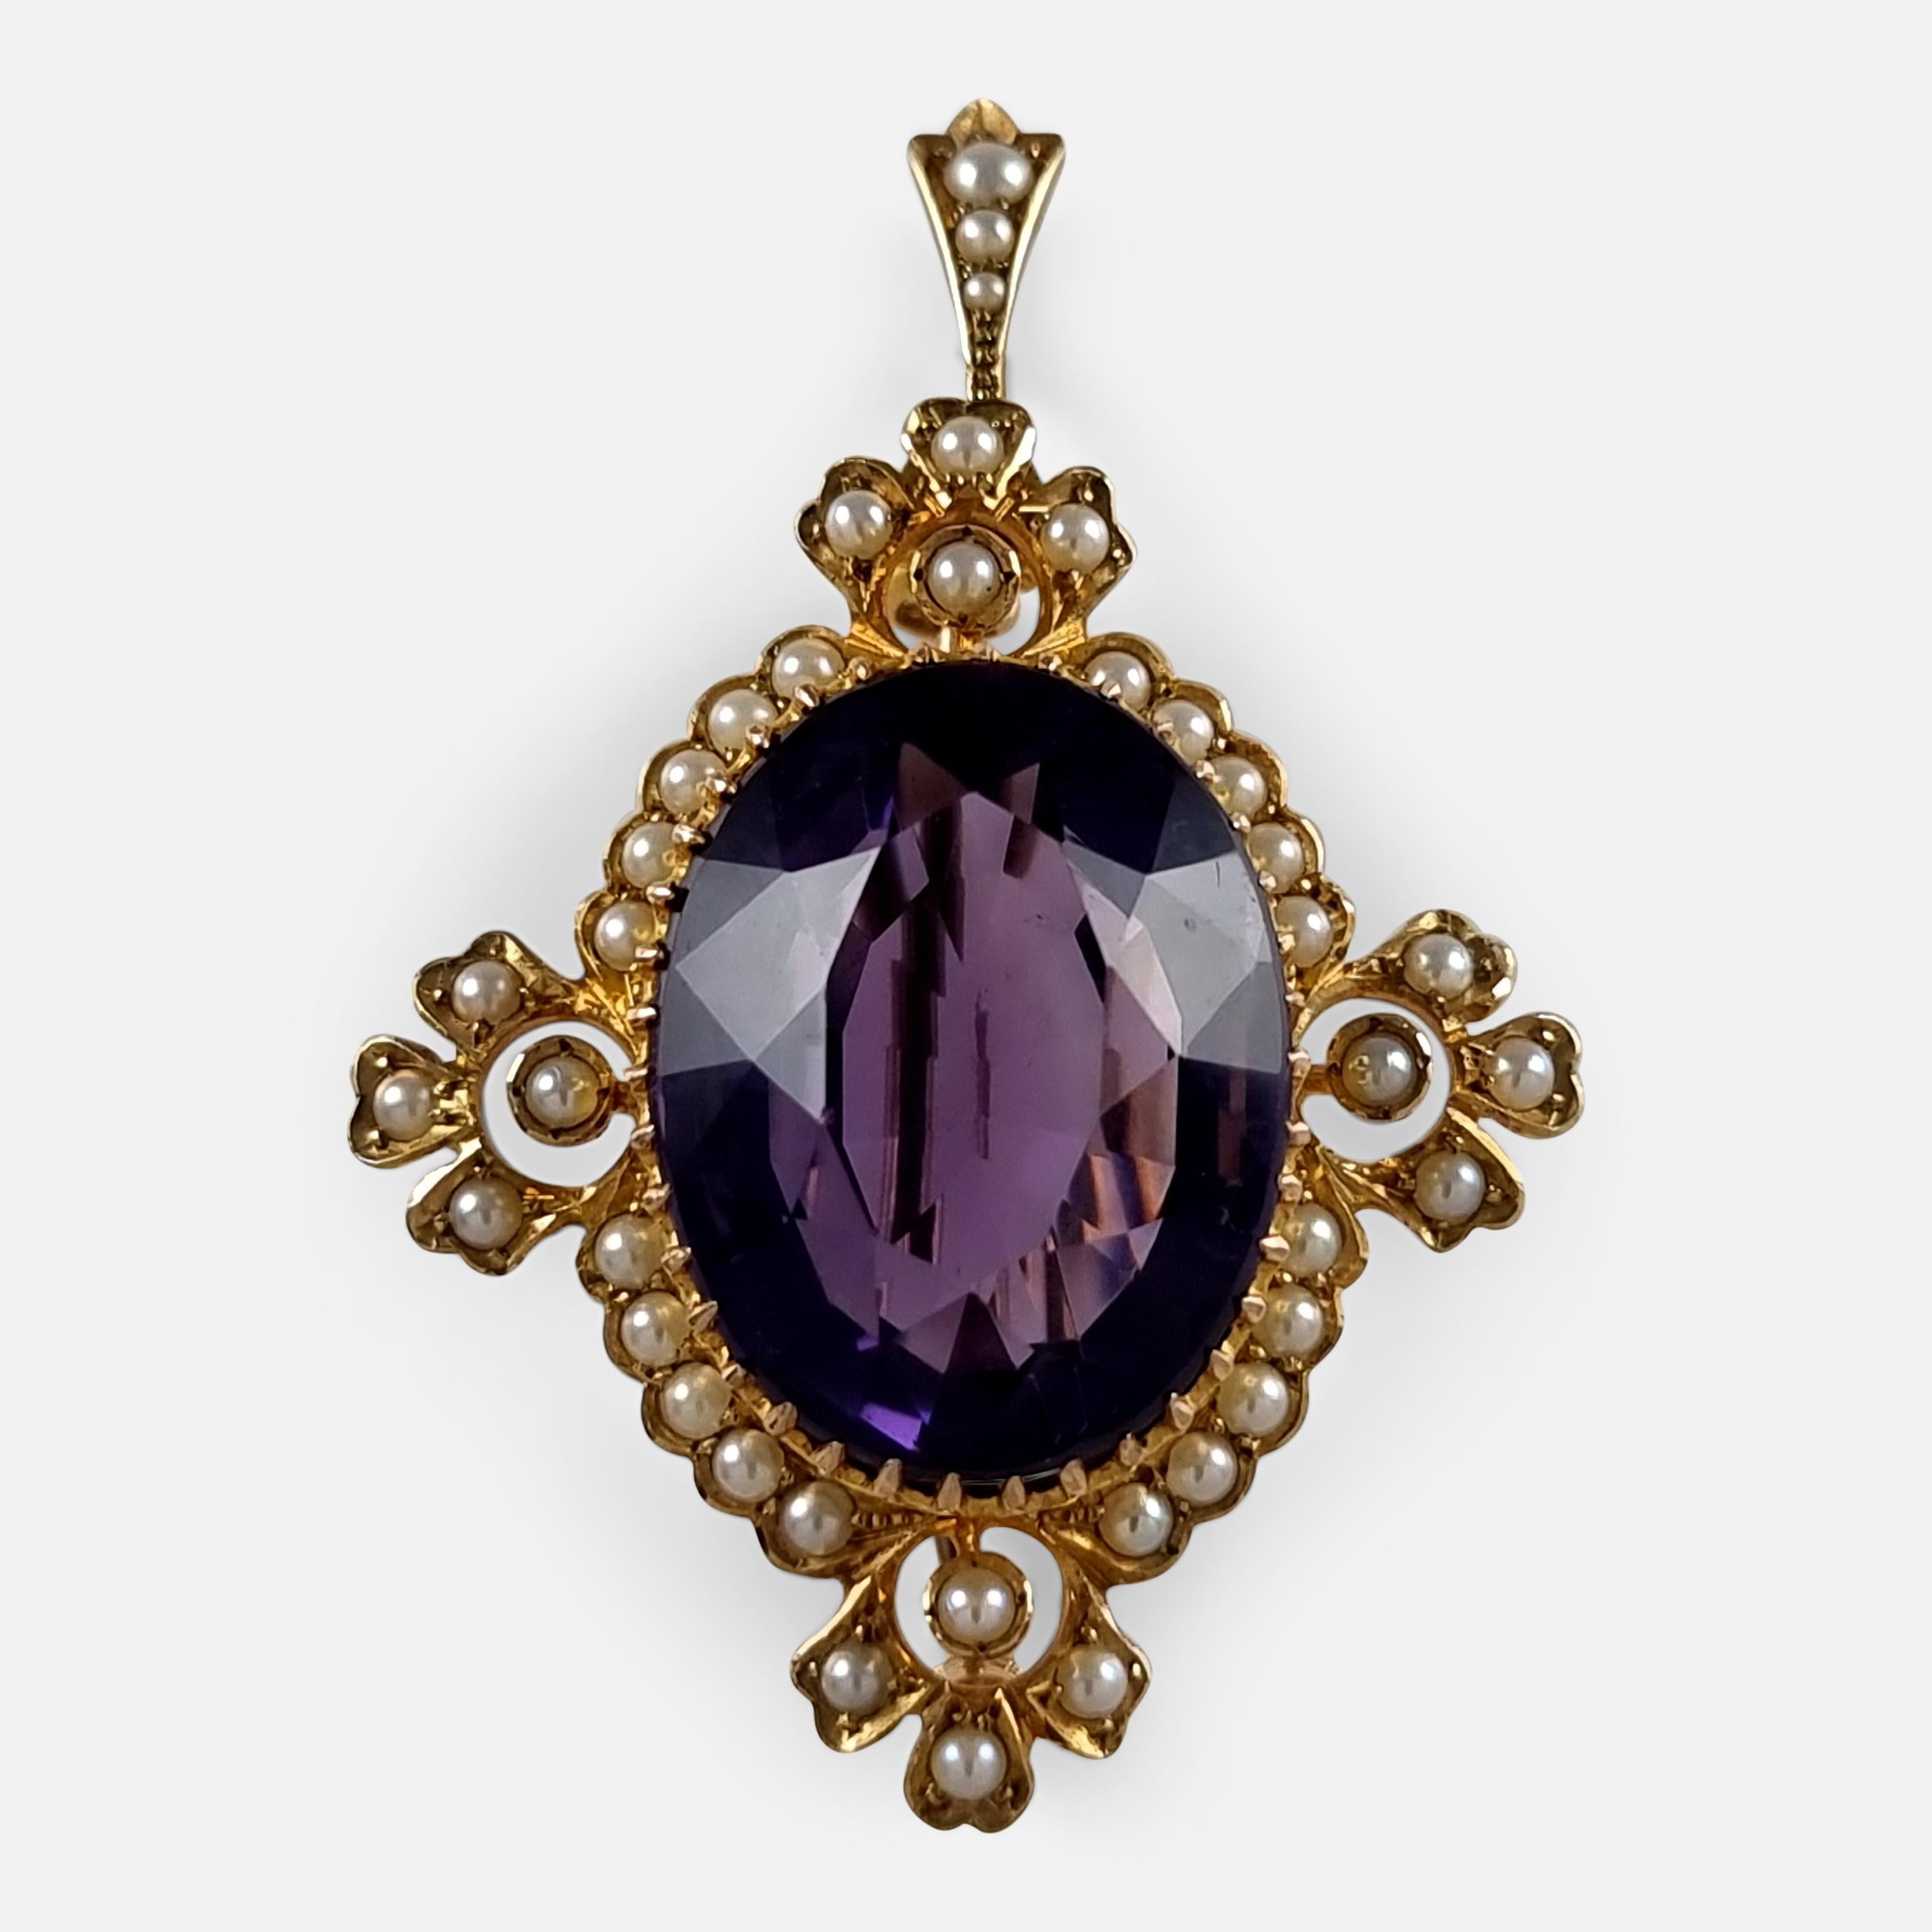 Edwardian 15ct Gold Amethyst and Seed Pearl Pendant Brooch 9